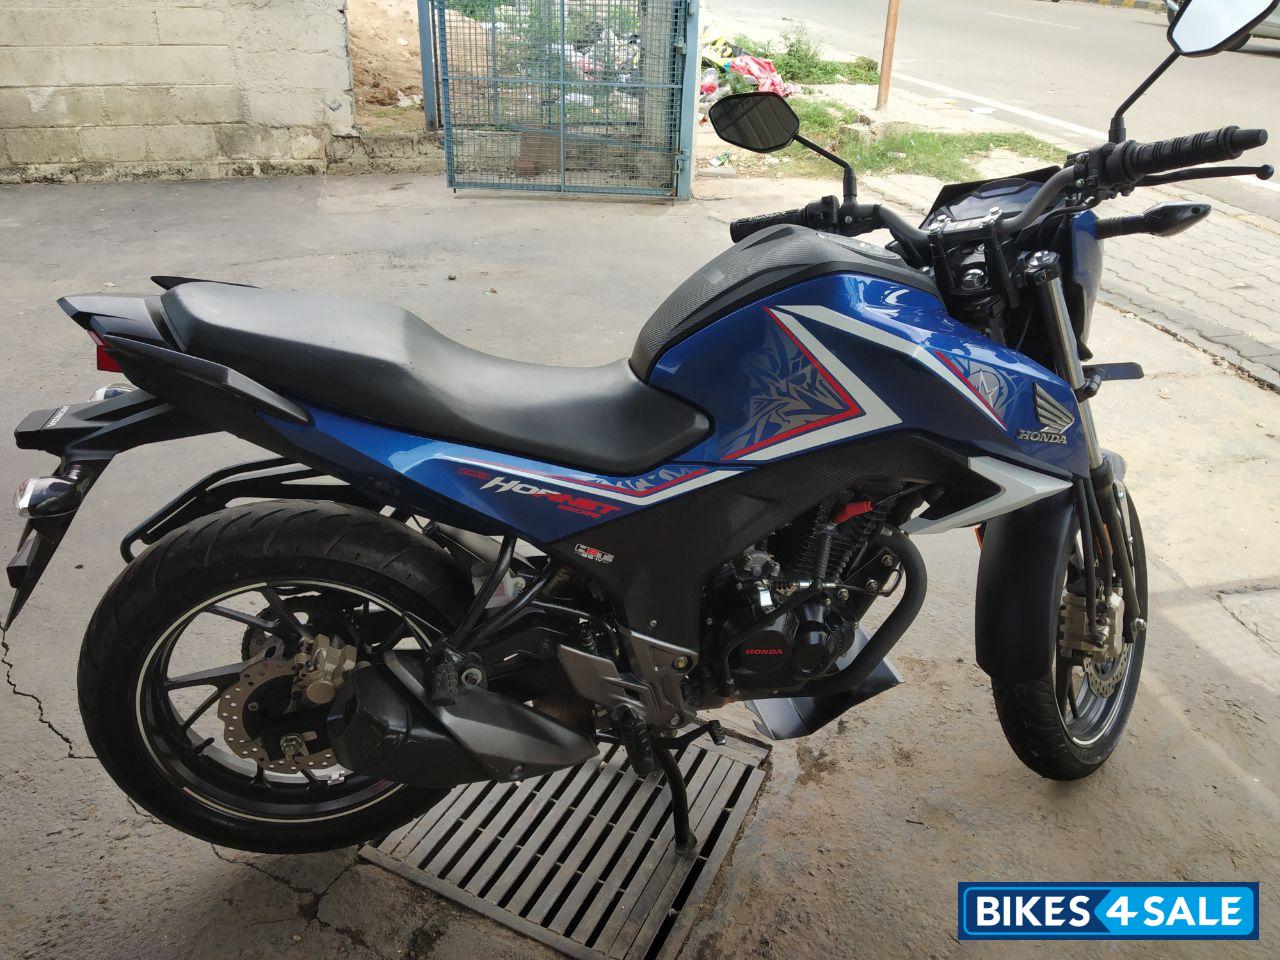 Used 17 Model Honda Cb Hornet 160r Abs For Sale In Bangalore Id Bikes4sale